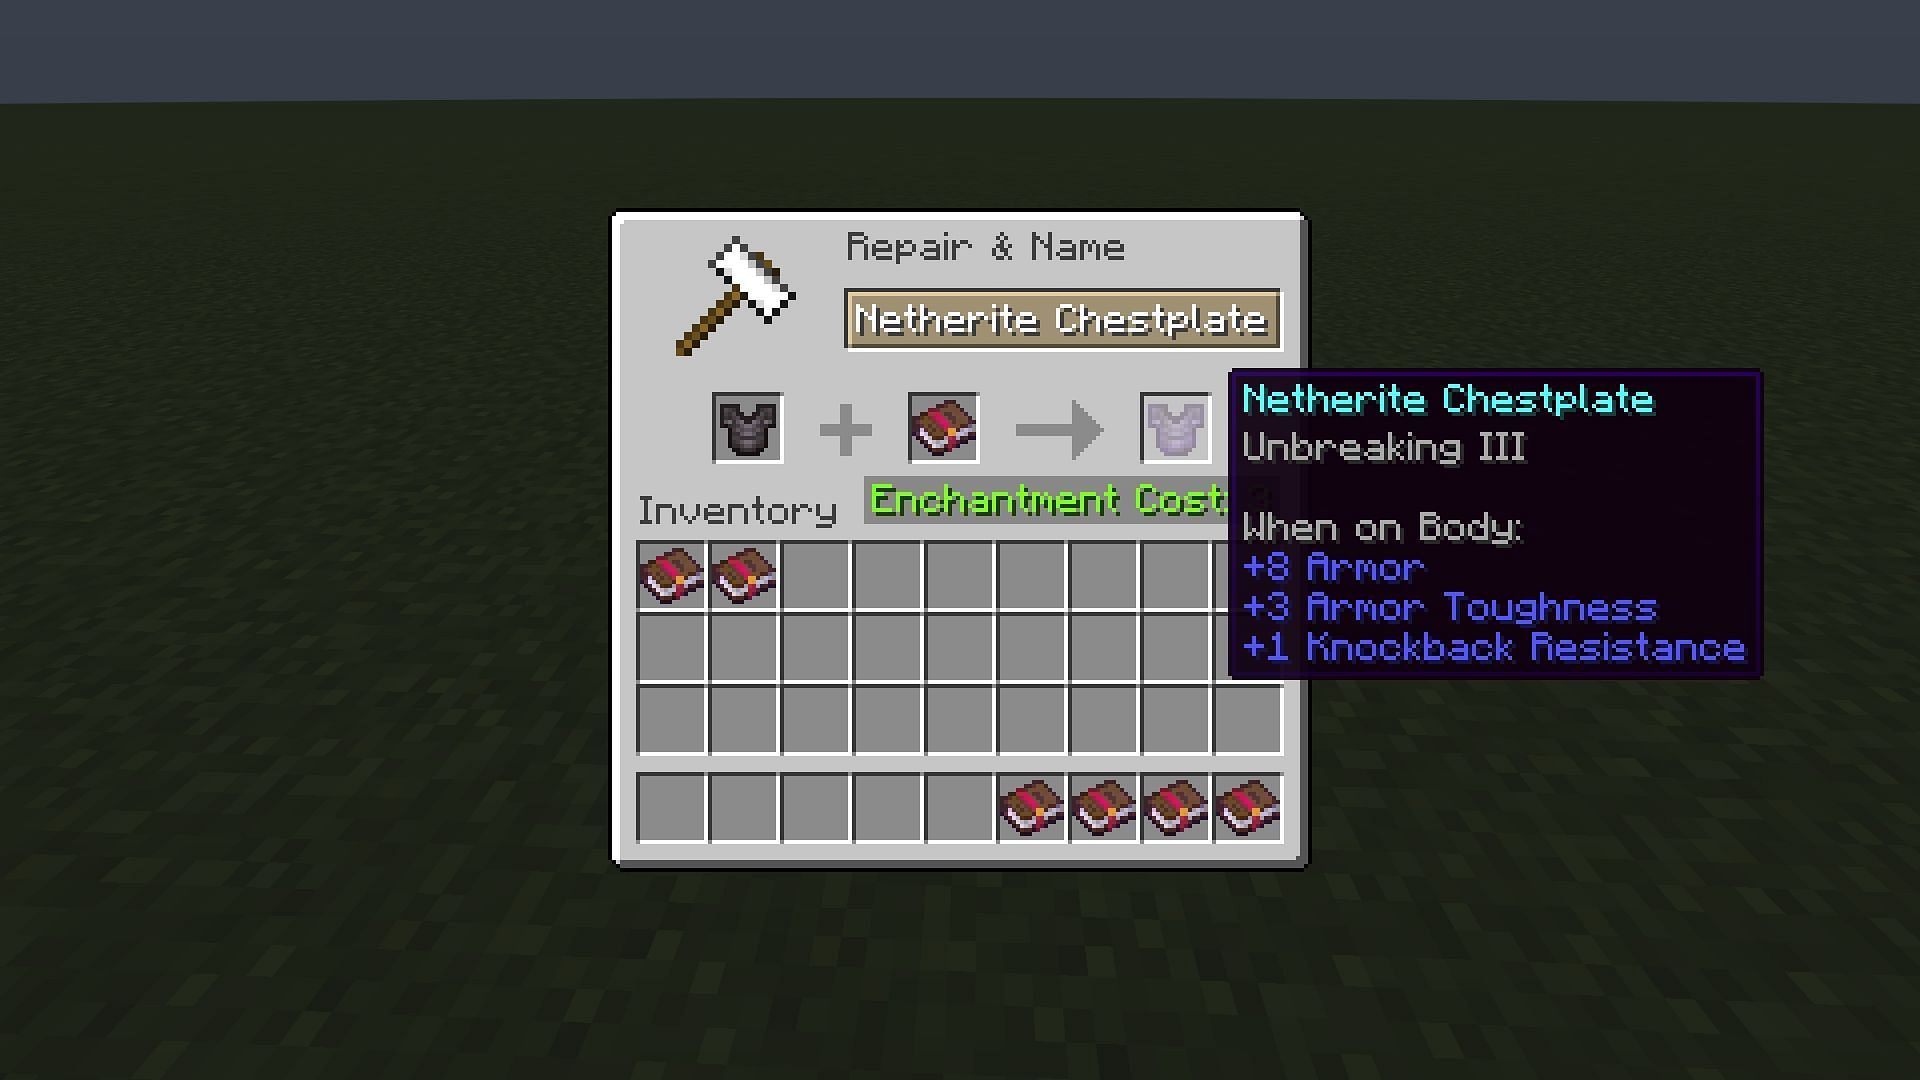 Unbreaking is one of the most commonly used enchantment that increases durability of items in Minecraft (Image via Mojang)